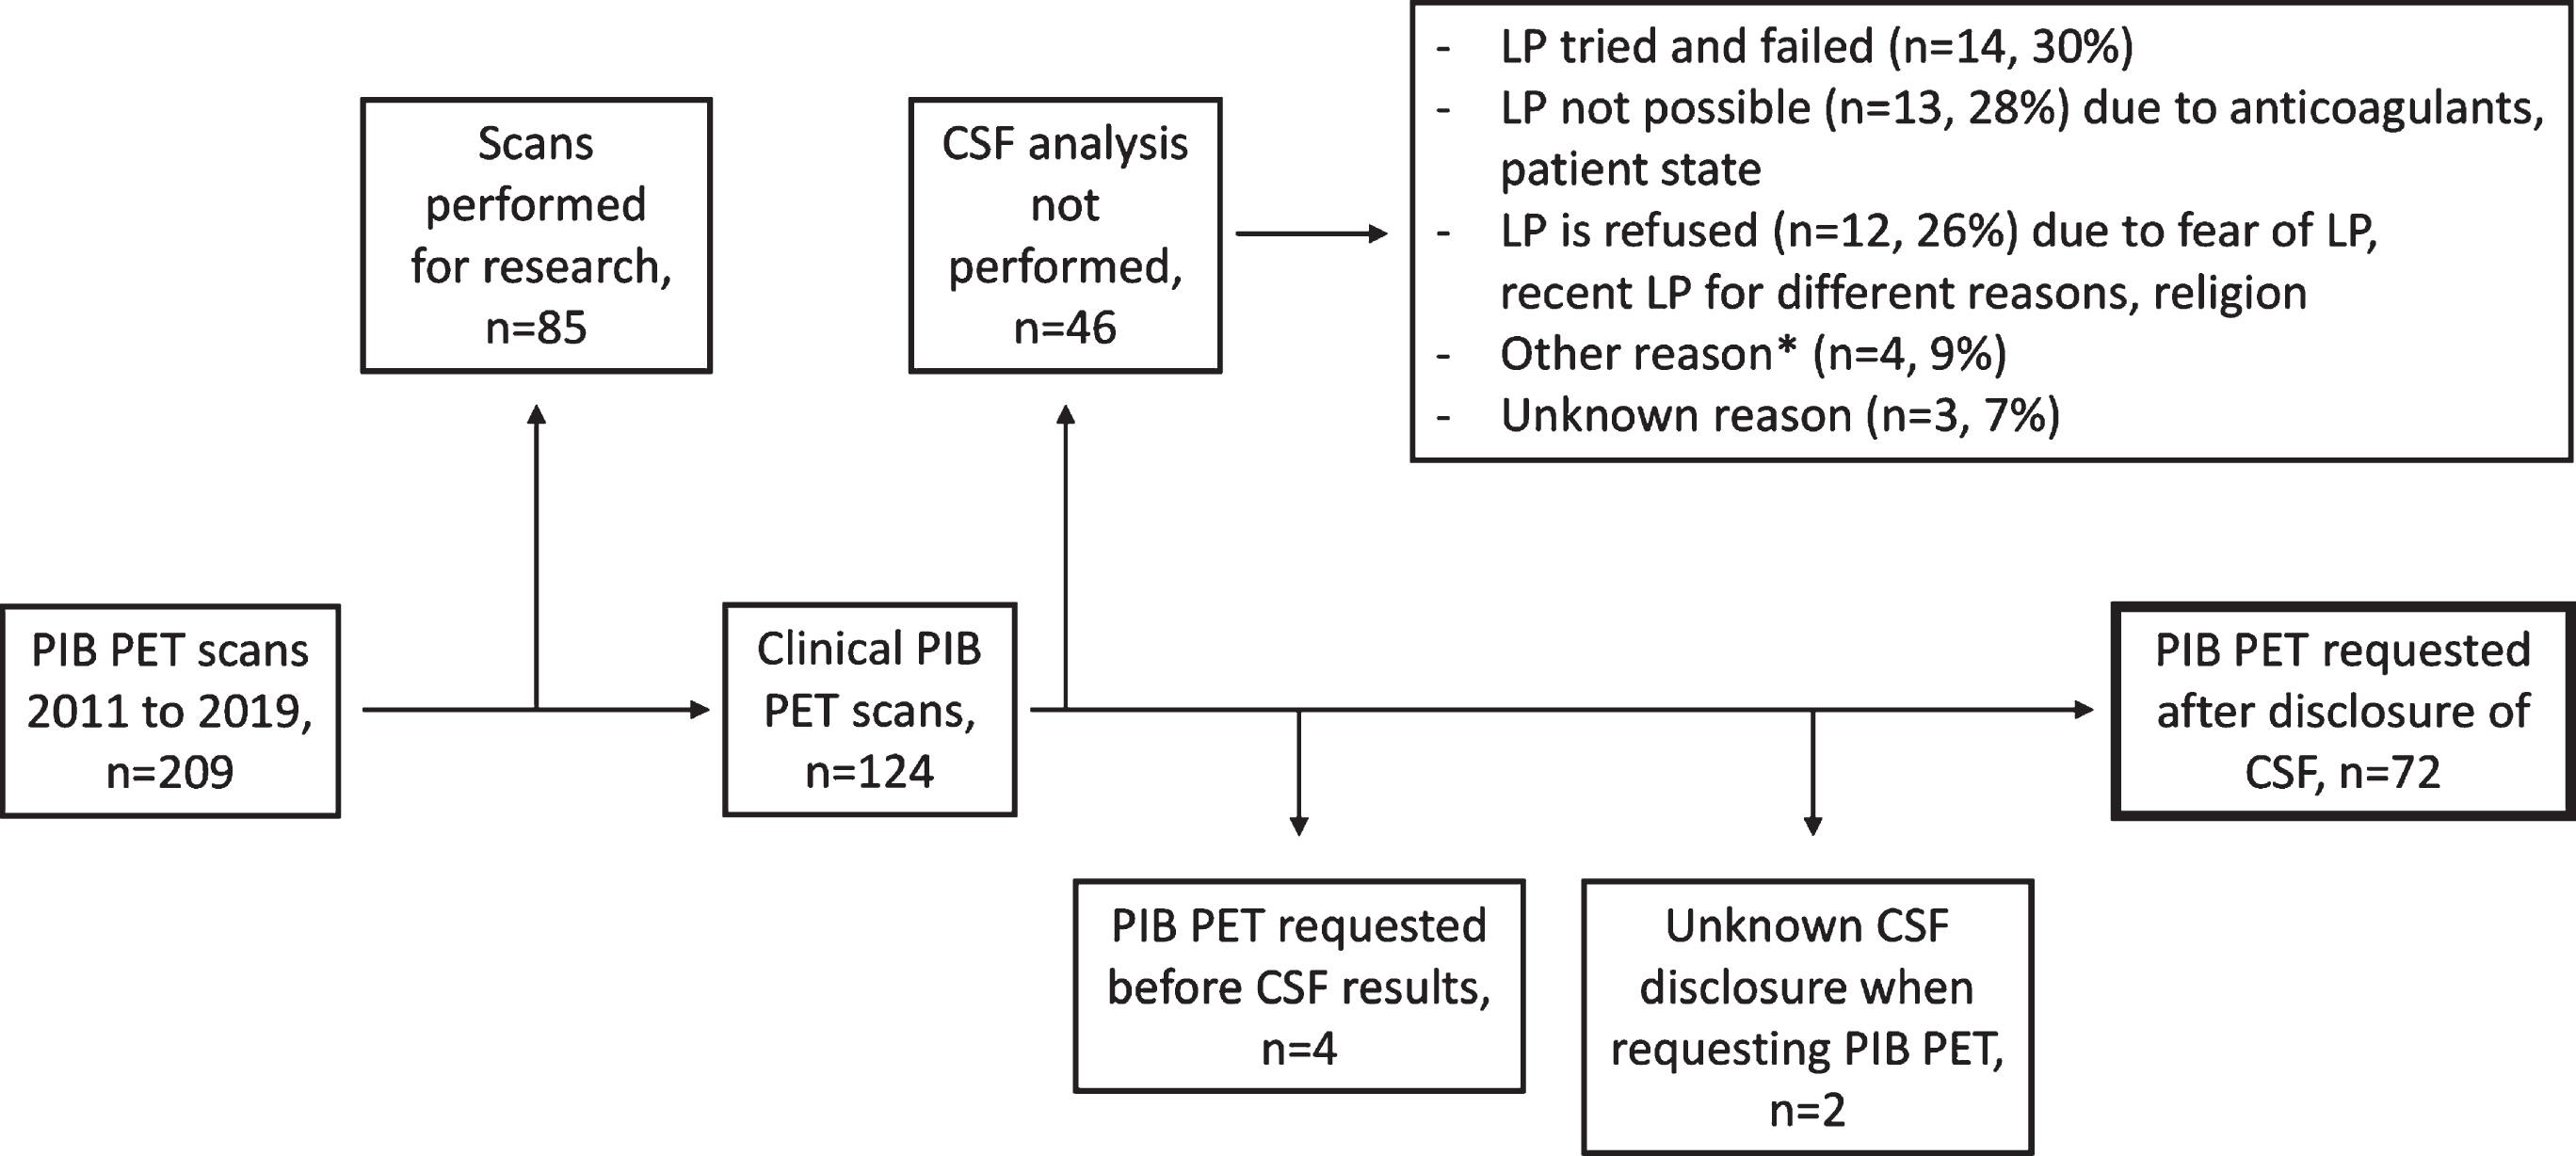 Flowchart for patient inclusion. *Other reasons include normal pressure hydrocephalus, increased certainty received from amyloid-β PET imaging, and imaging having a greater influence on convincing patients. CSF, cerebrospinal fluid; LP, lumbar puncture; PIB PET, positron emission tomography with 11C-Pittsburgh compound B.